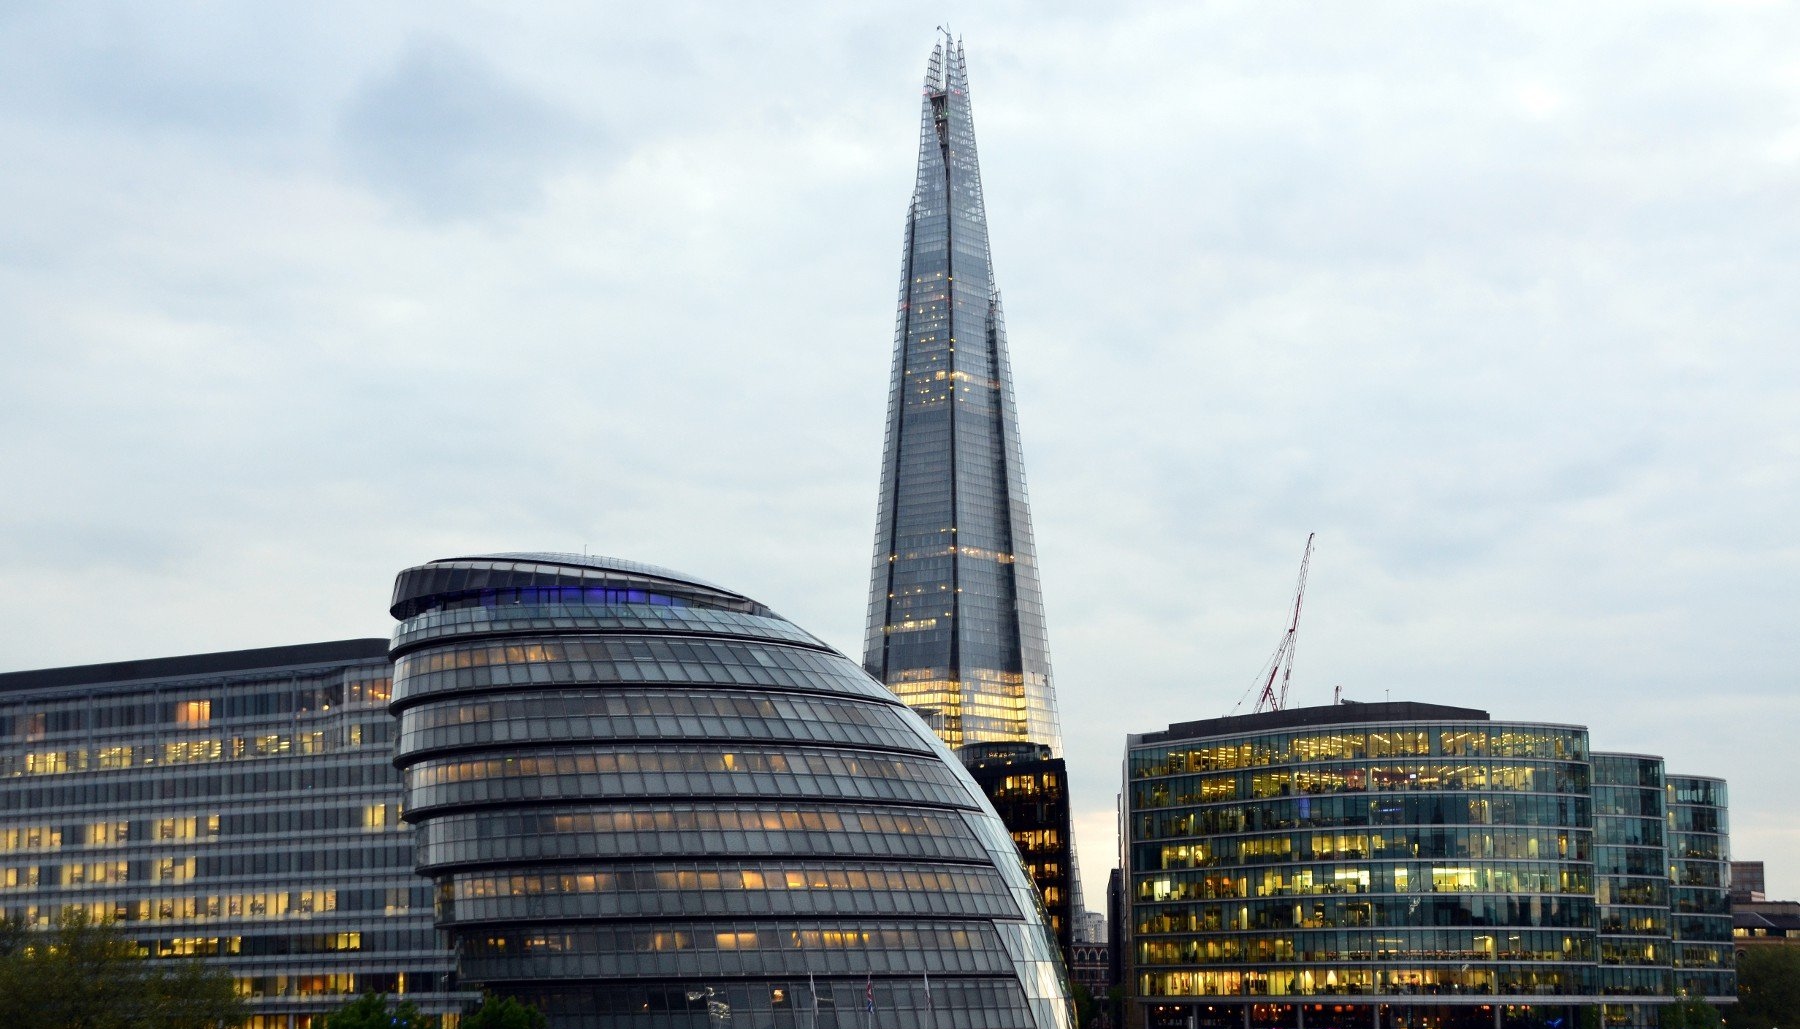 The Shard is finally getting tenants but is still only 30% full